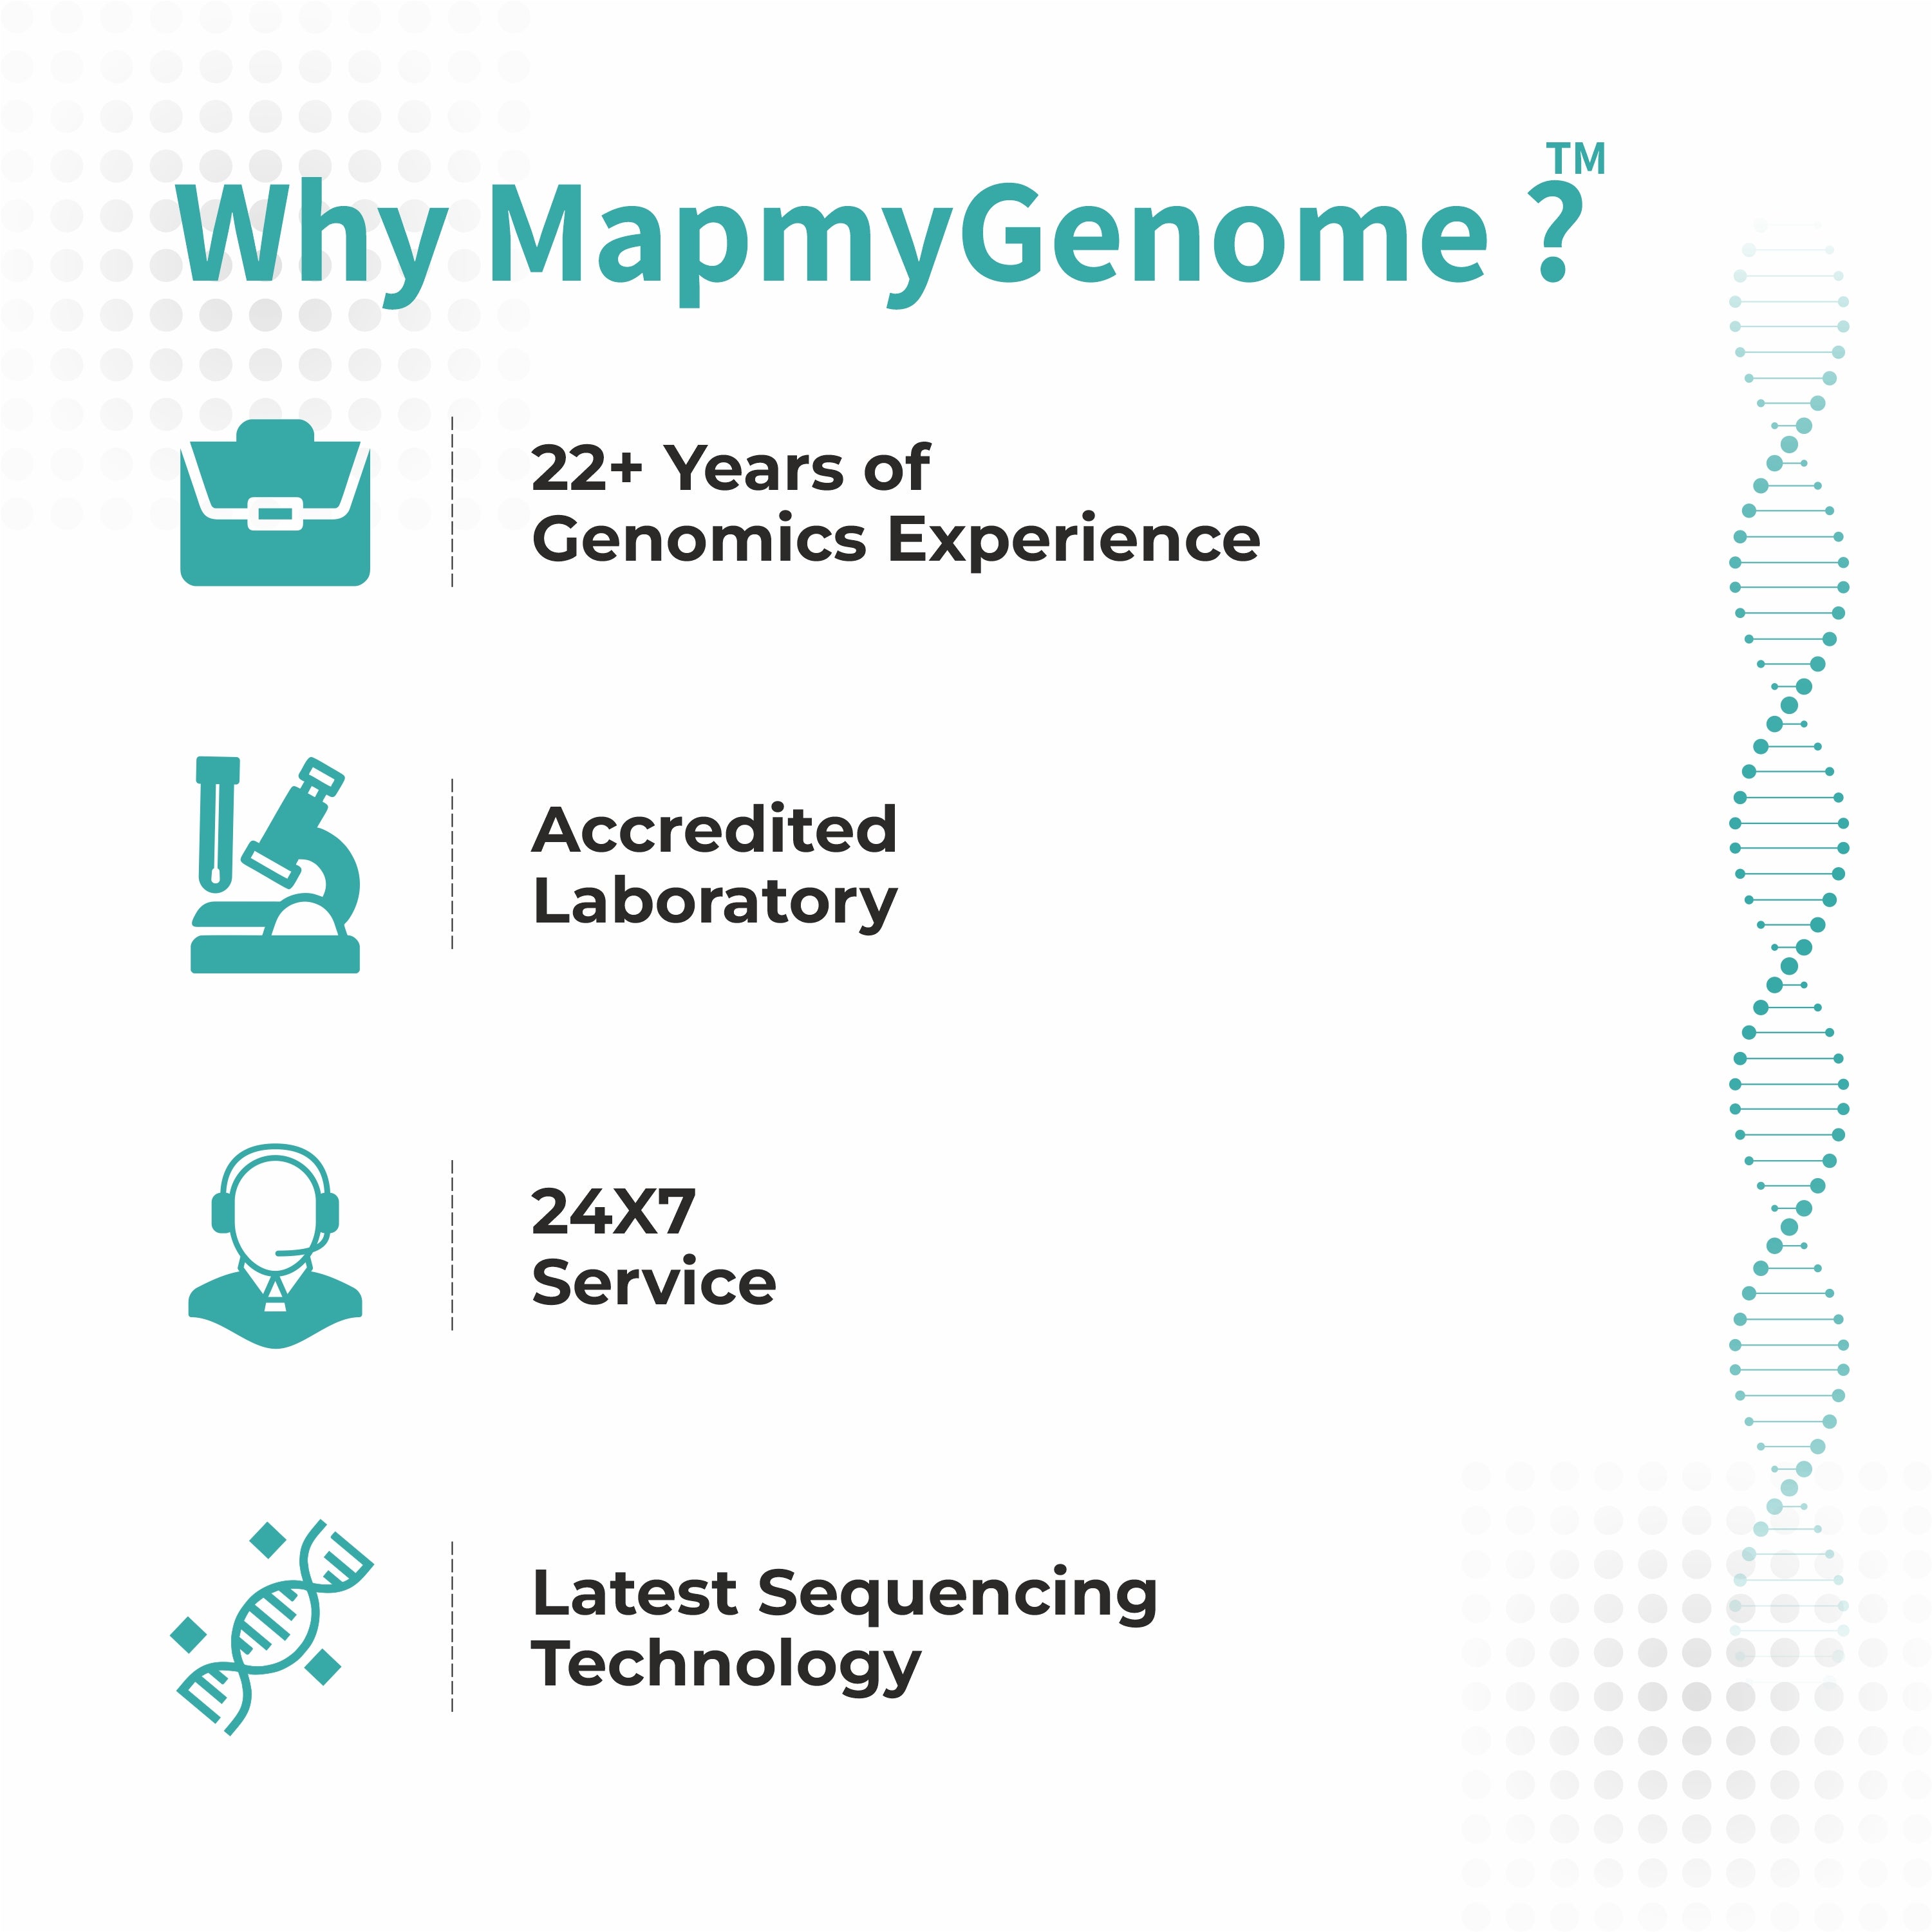 Why MapmyGenome